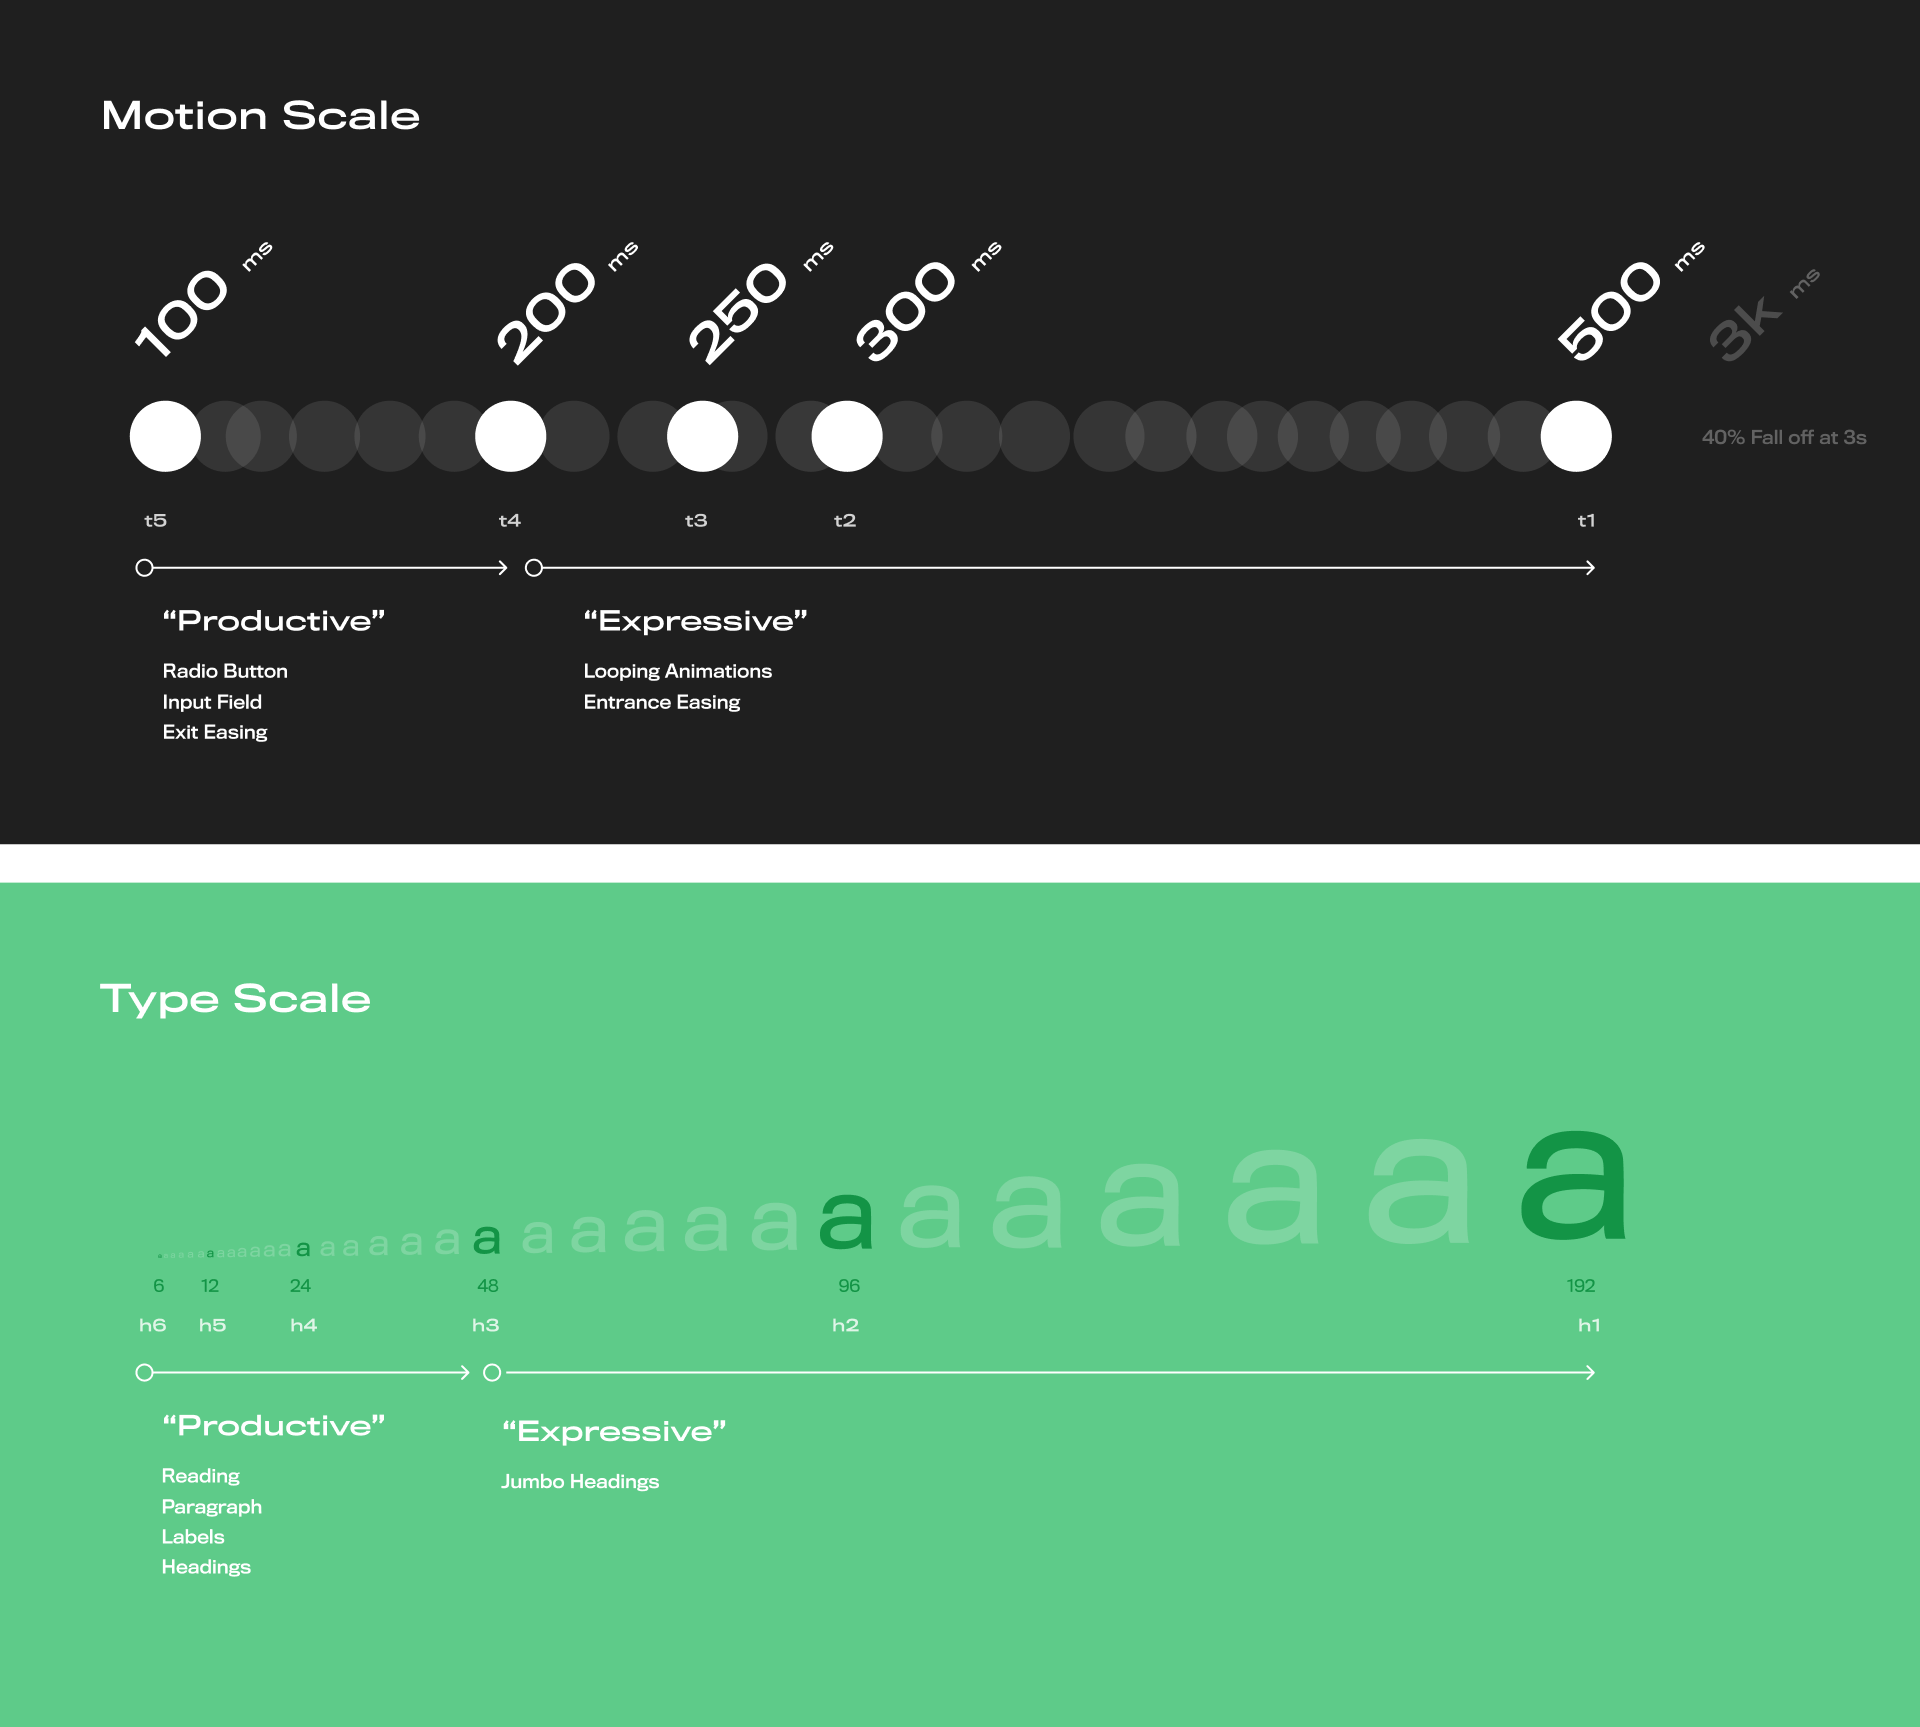 Motion Scales